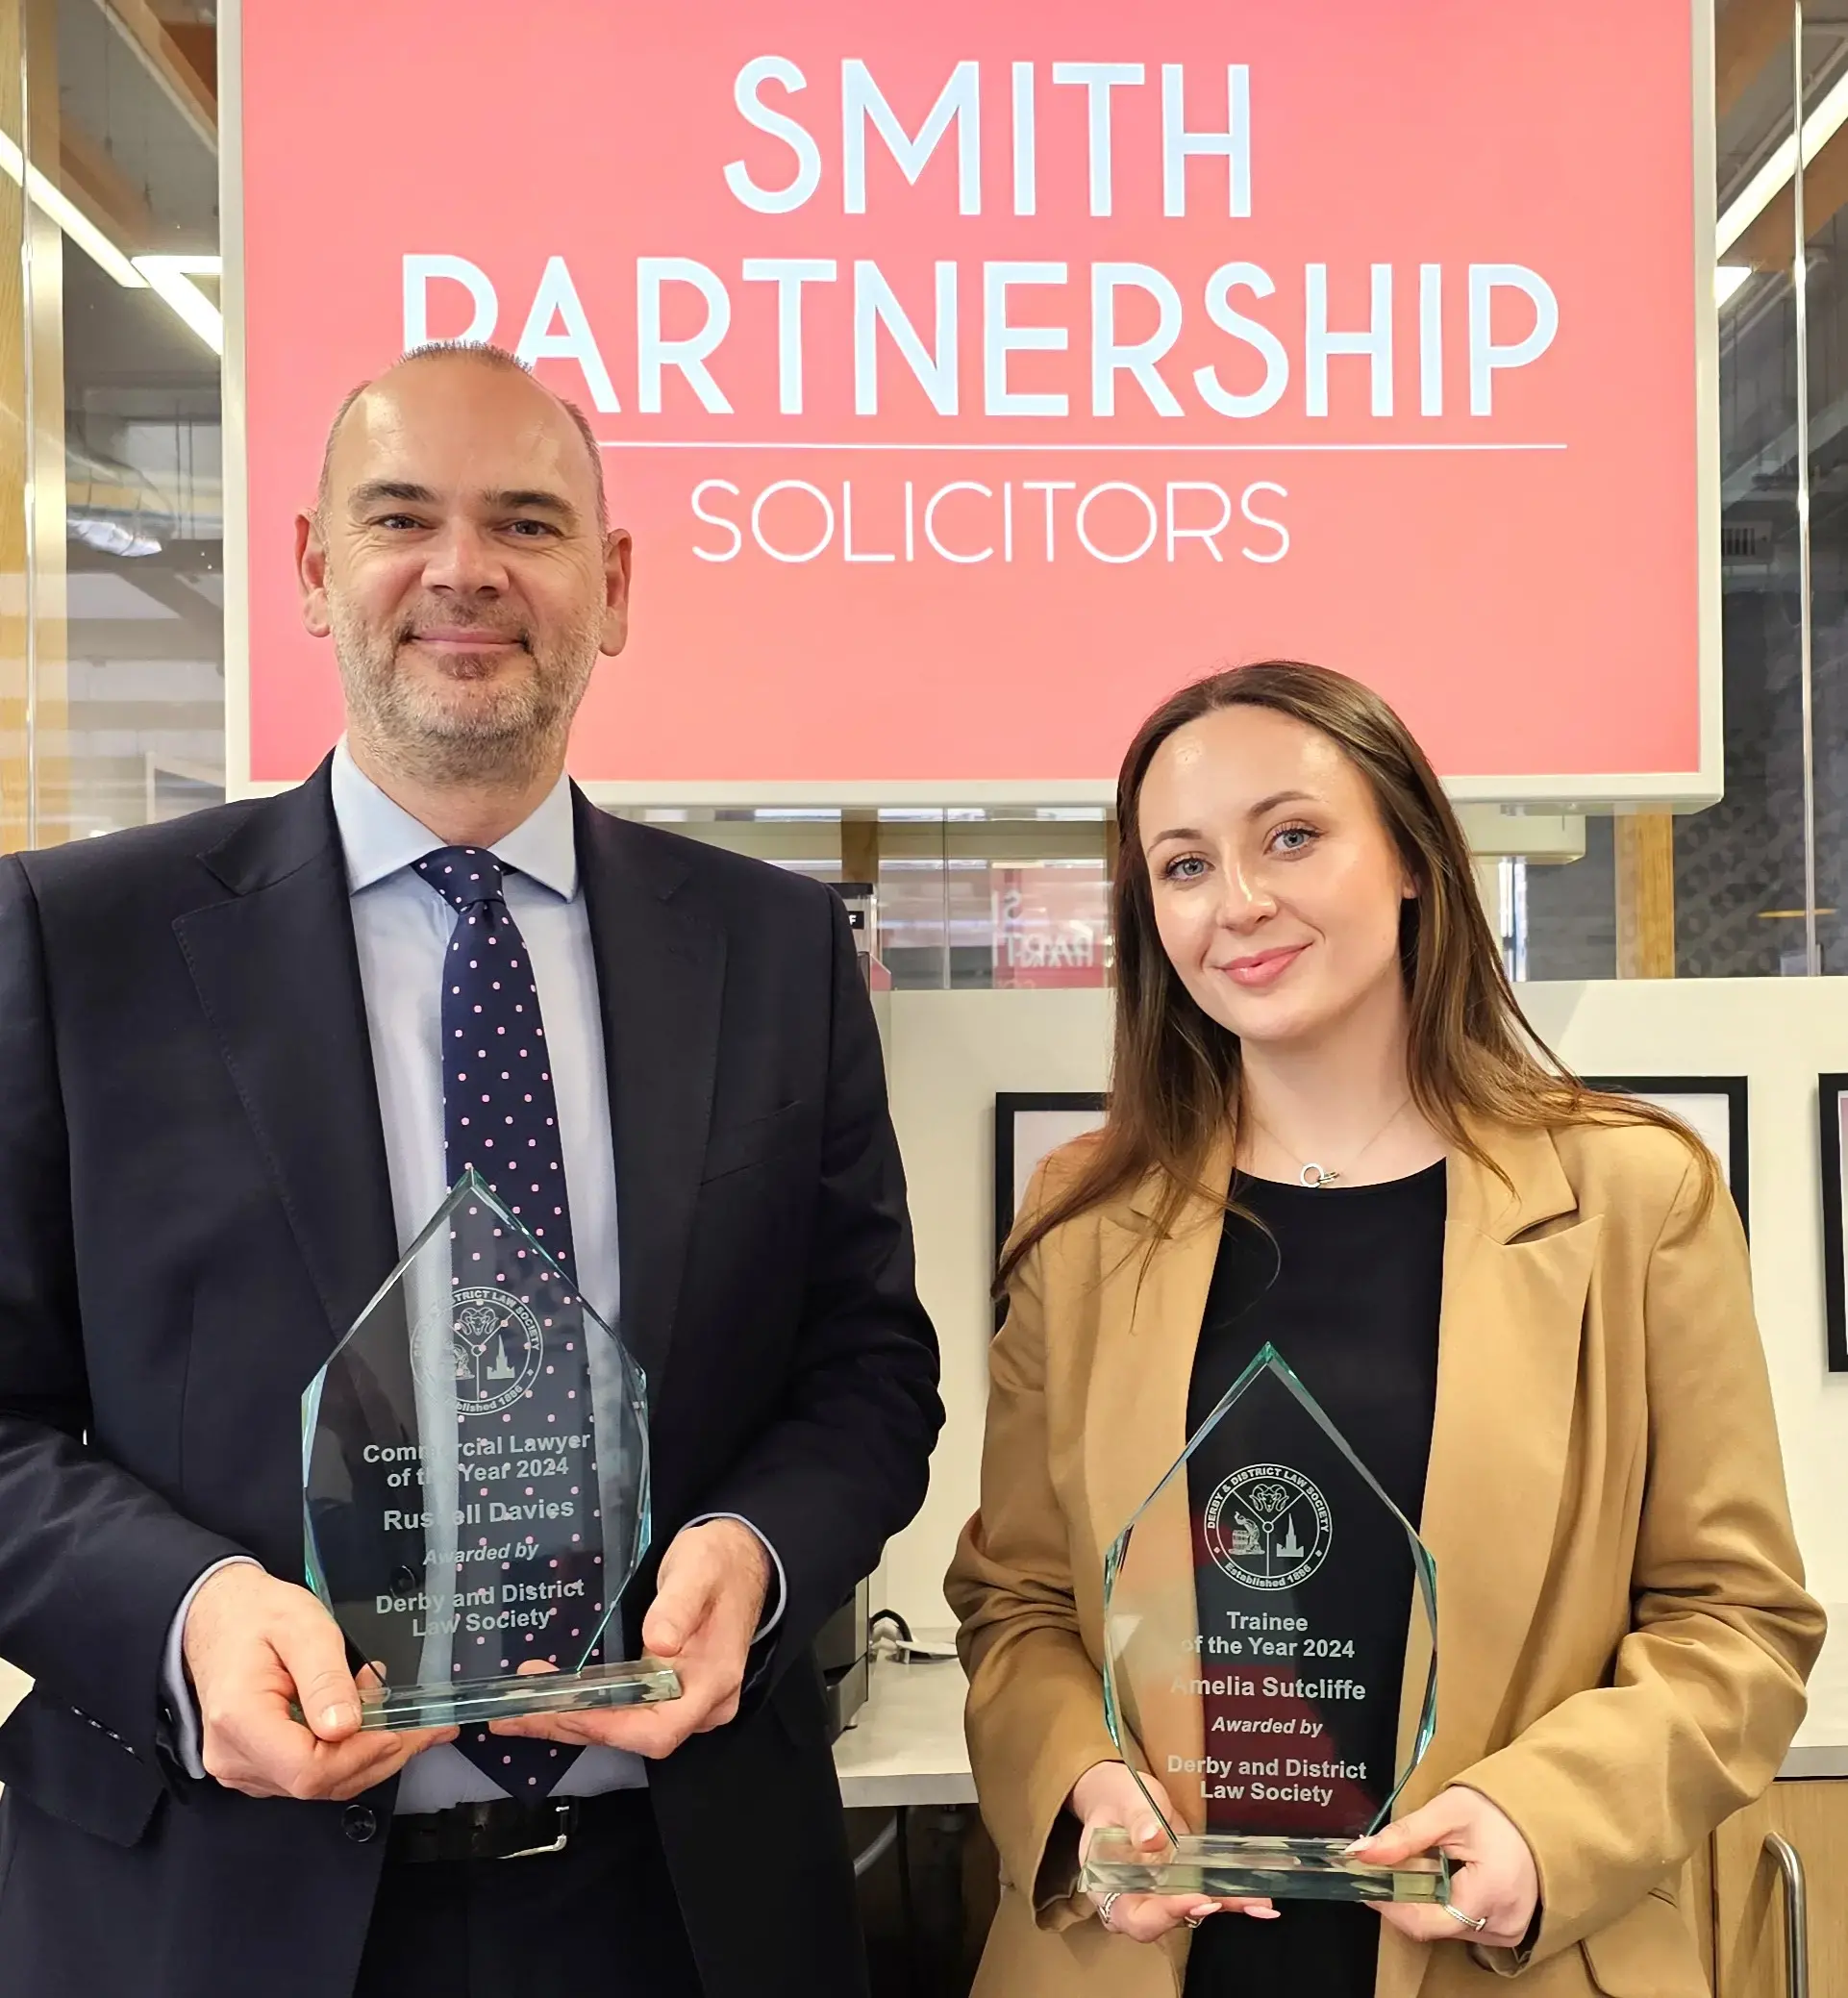 smith-partnership-celebrates-double-triumph-derby-and-district-law-society-awards